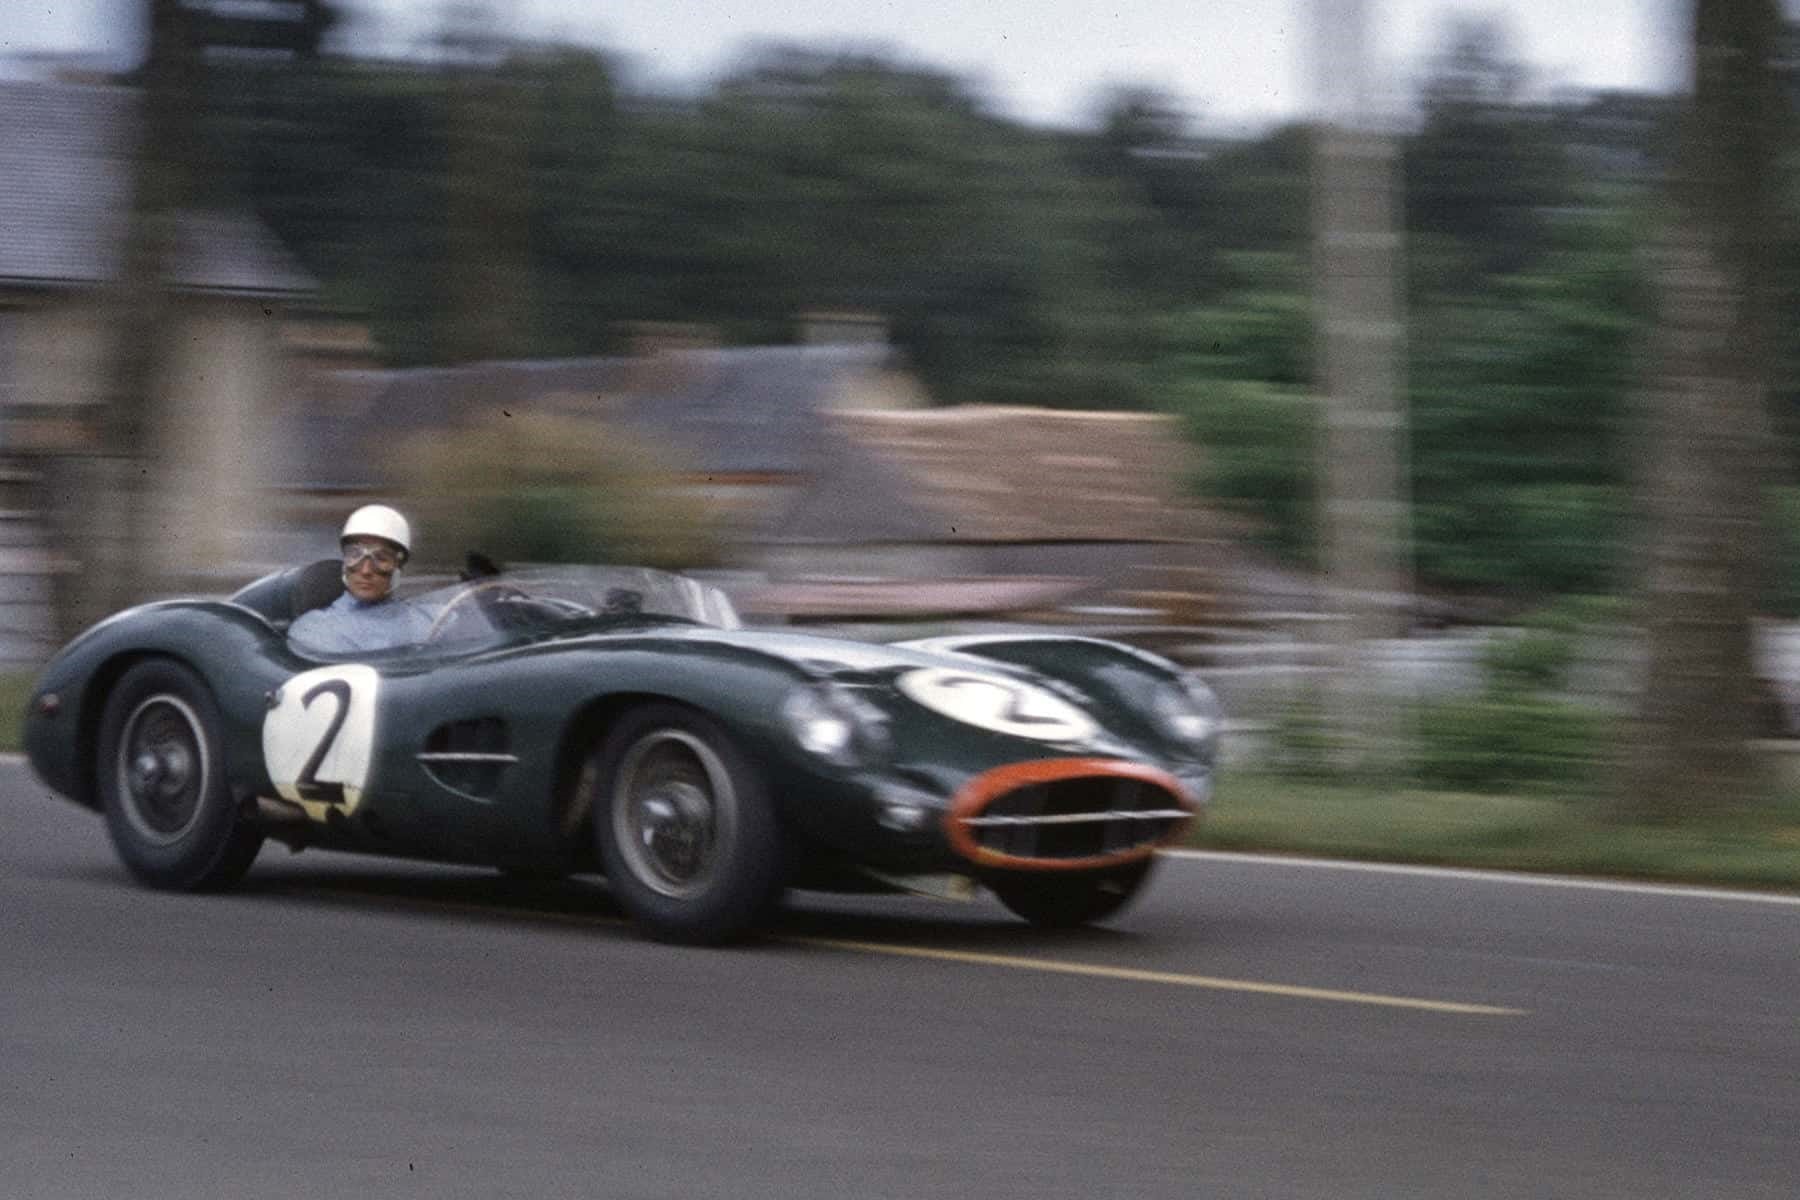 Stirling Moss in action.